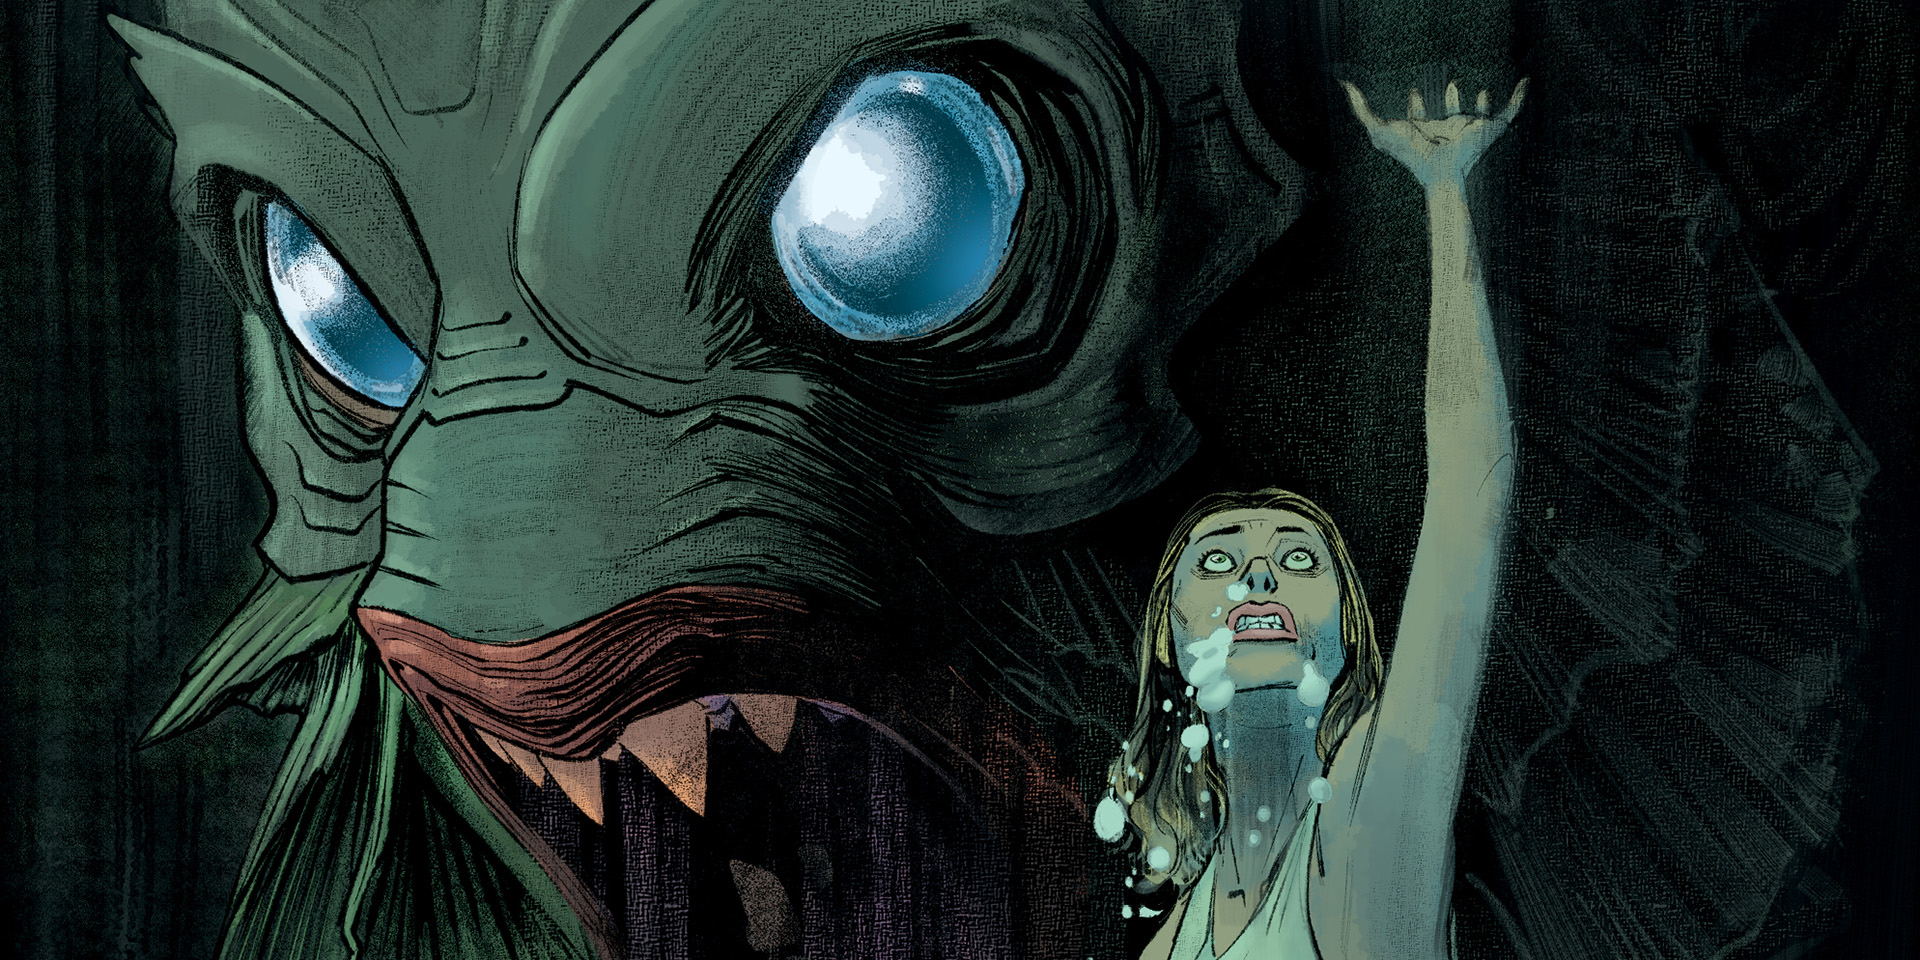 First Look at Universal Monsters: Creature from the Black Lagoon Lives! #4